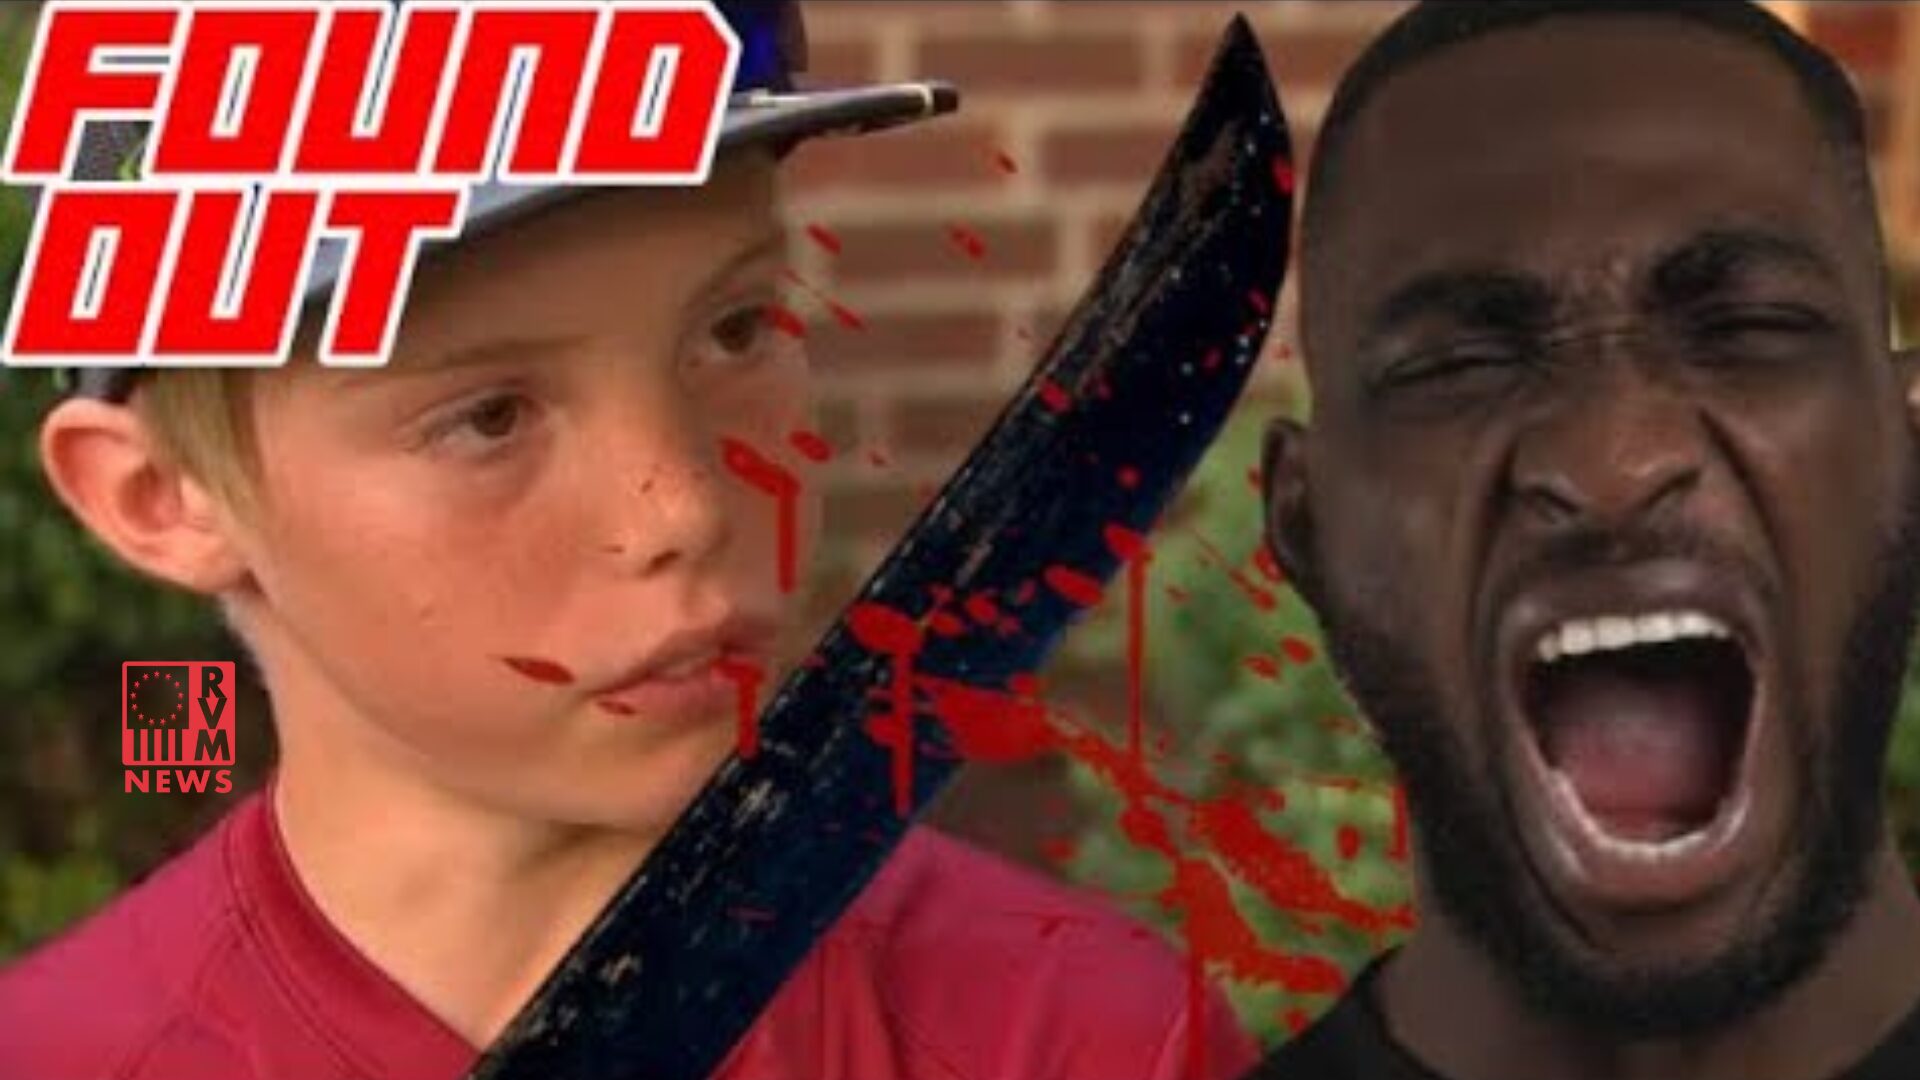 11 Year Old Smashes Home Intruder In The Head With A Machete [VIDEO]